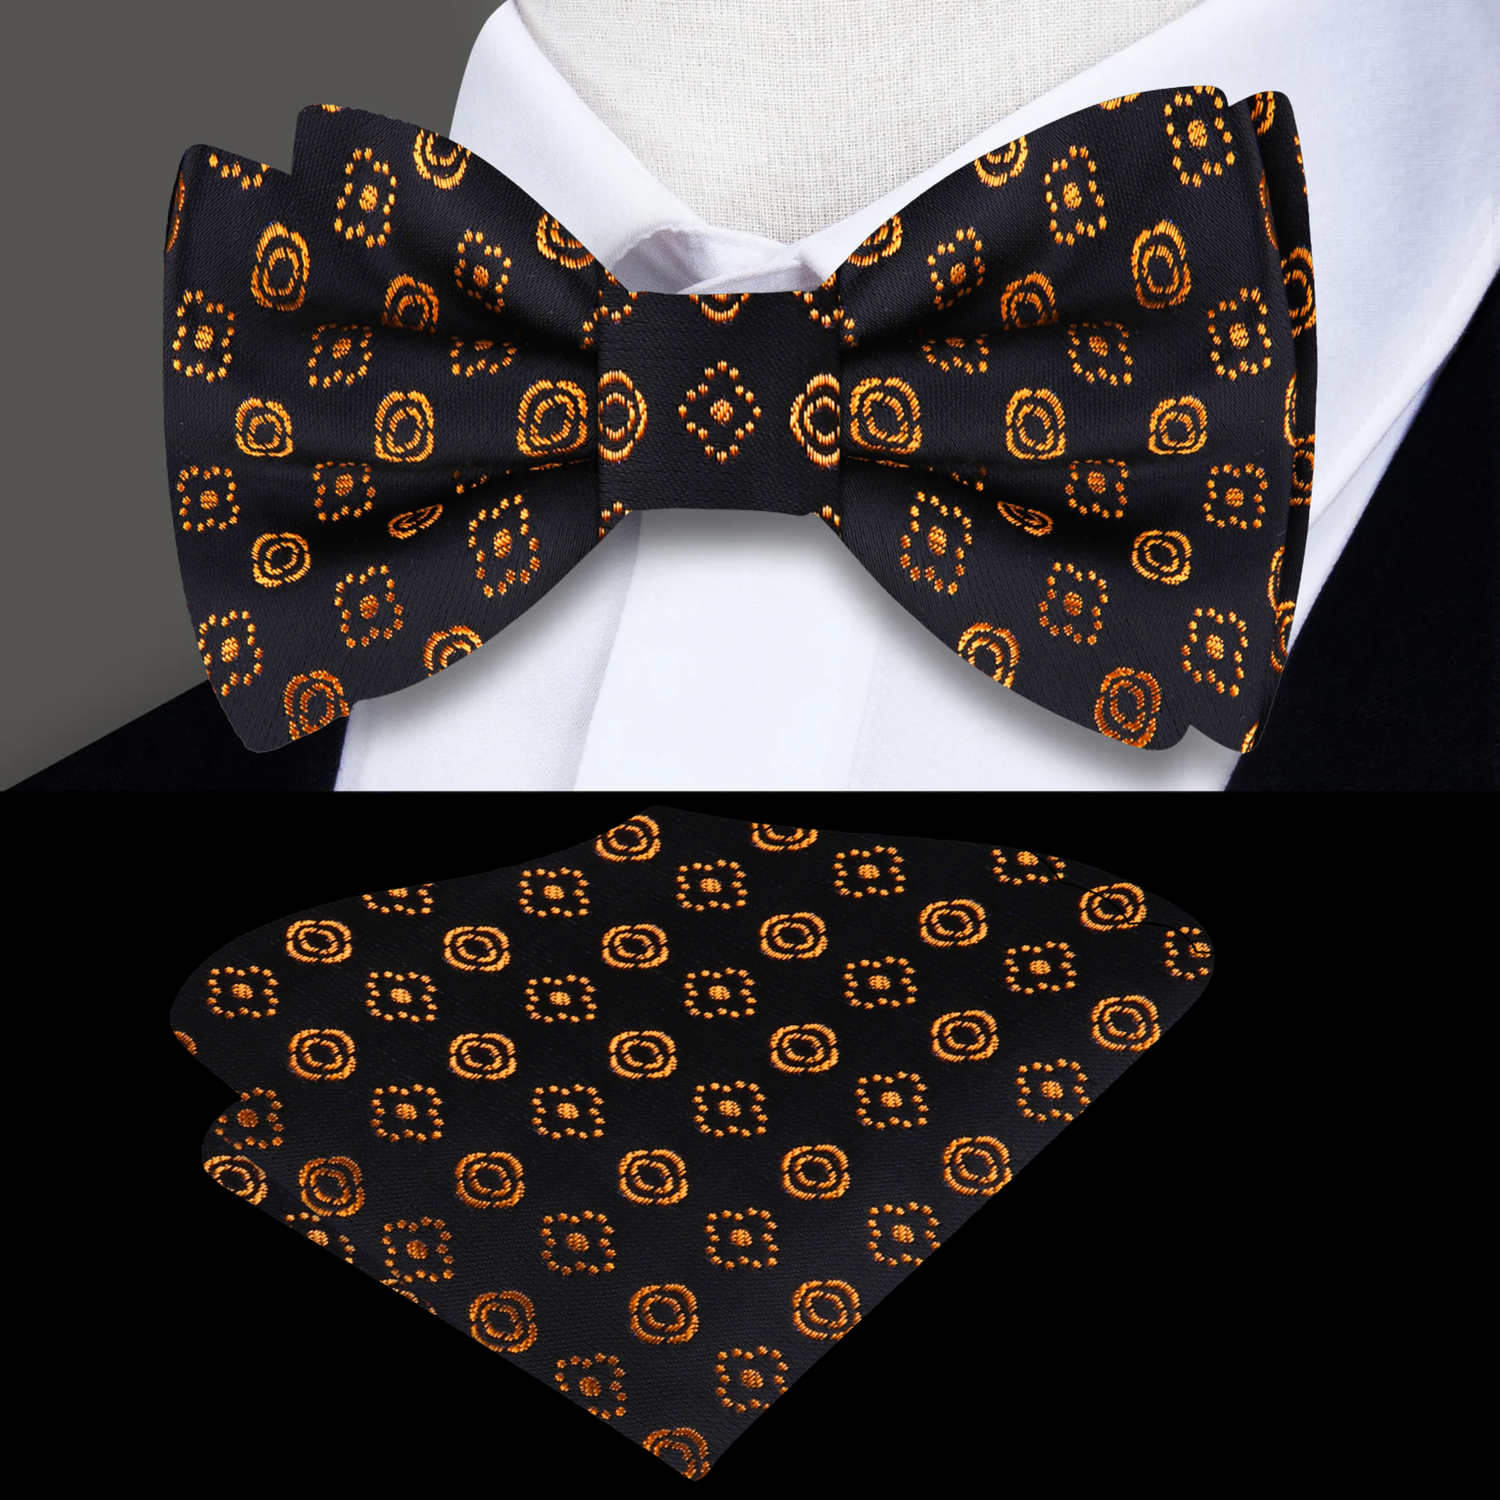 Black, Blue, Deep Gold Lines With Flowers Bow Tie and Pocket Square||Gold, Black, Blue